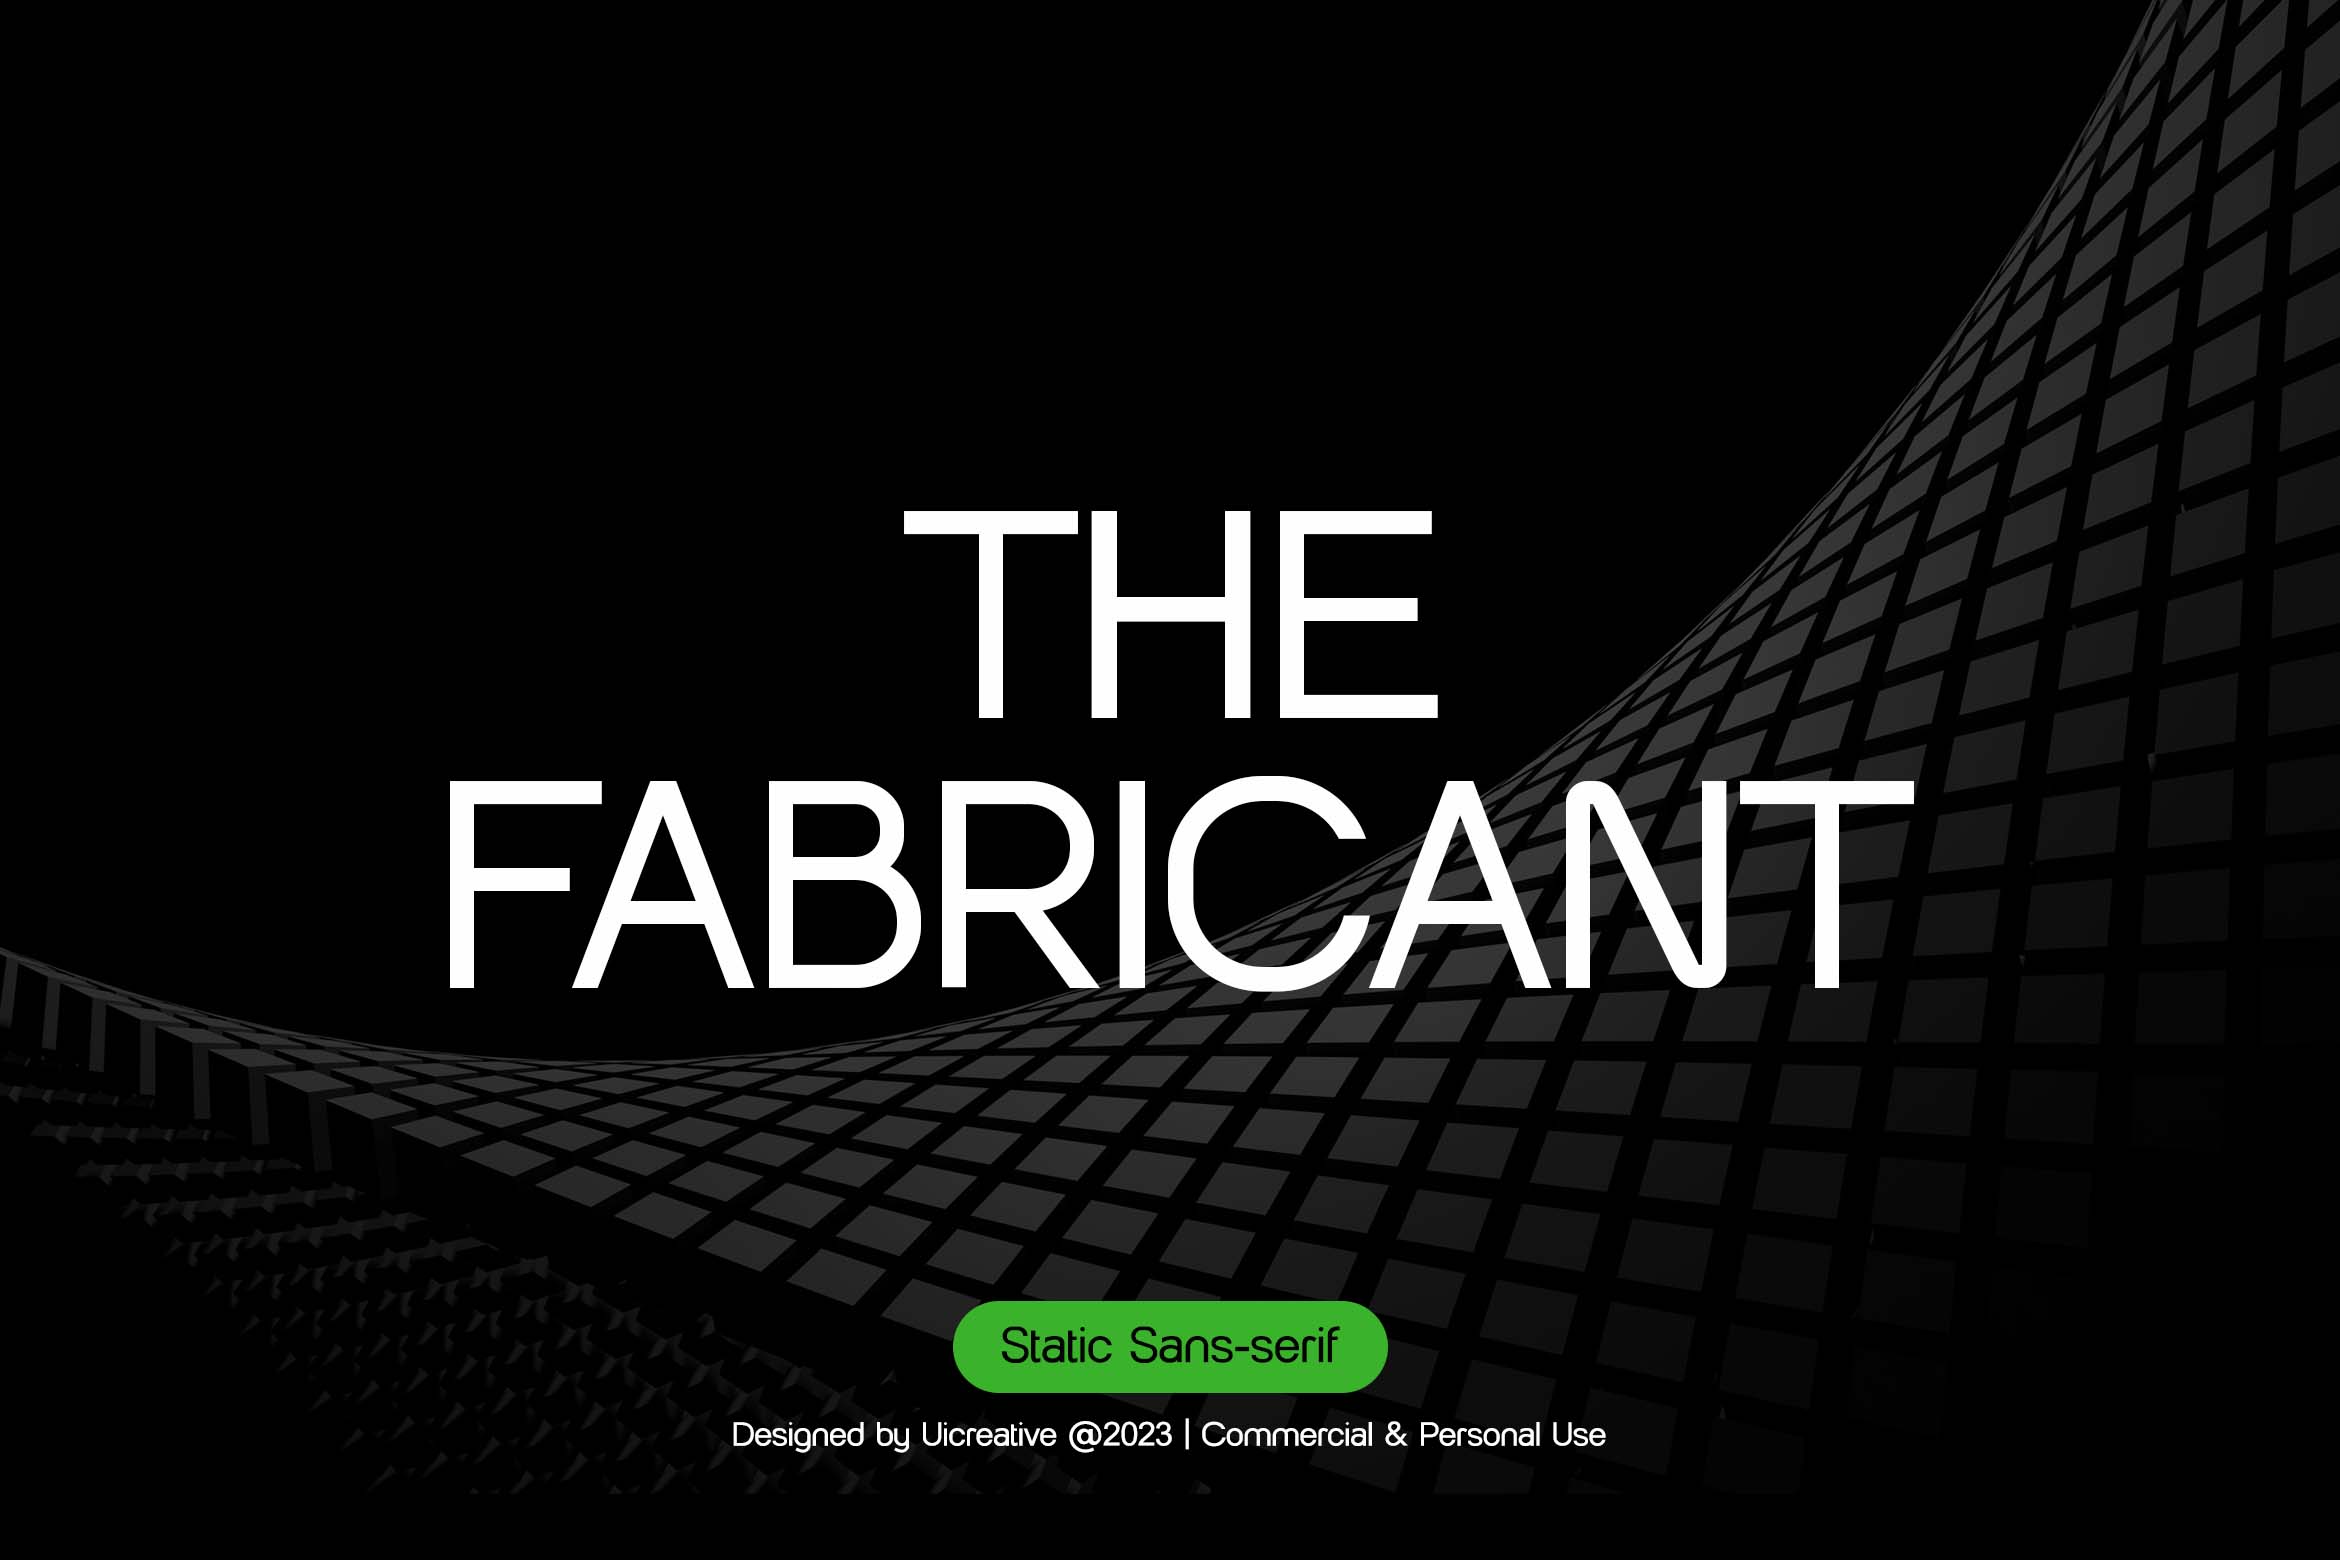 THE FABRICANT